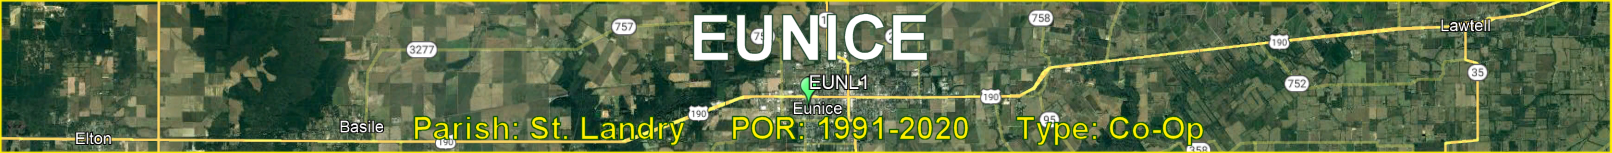 Title image for Eunice